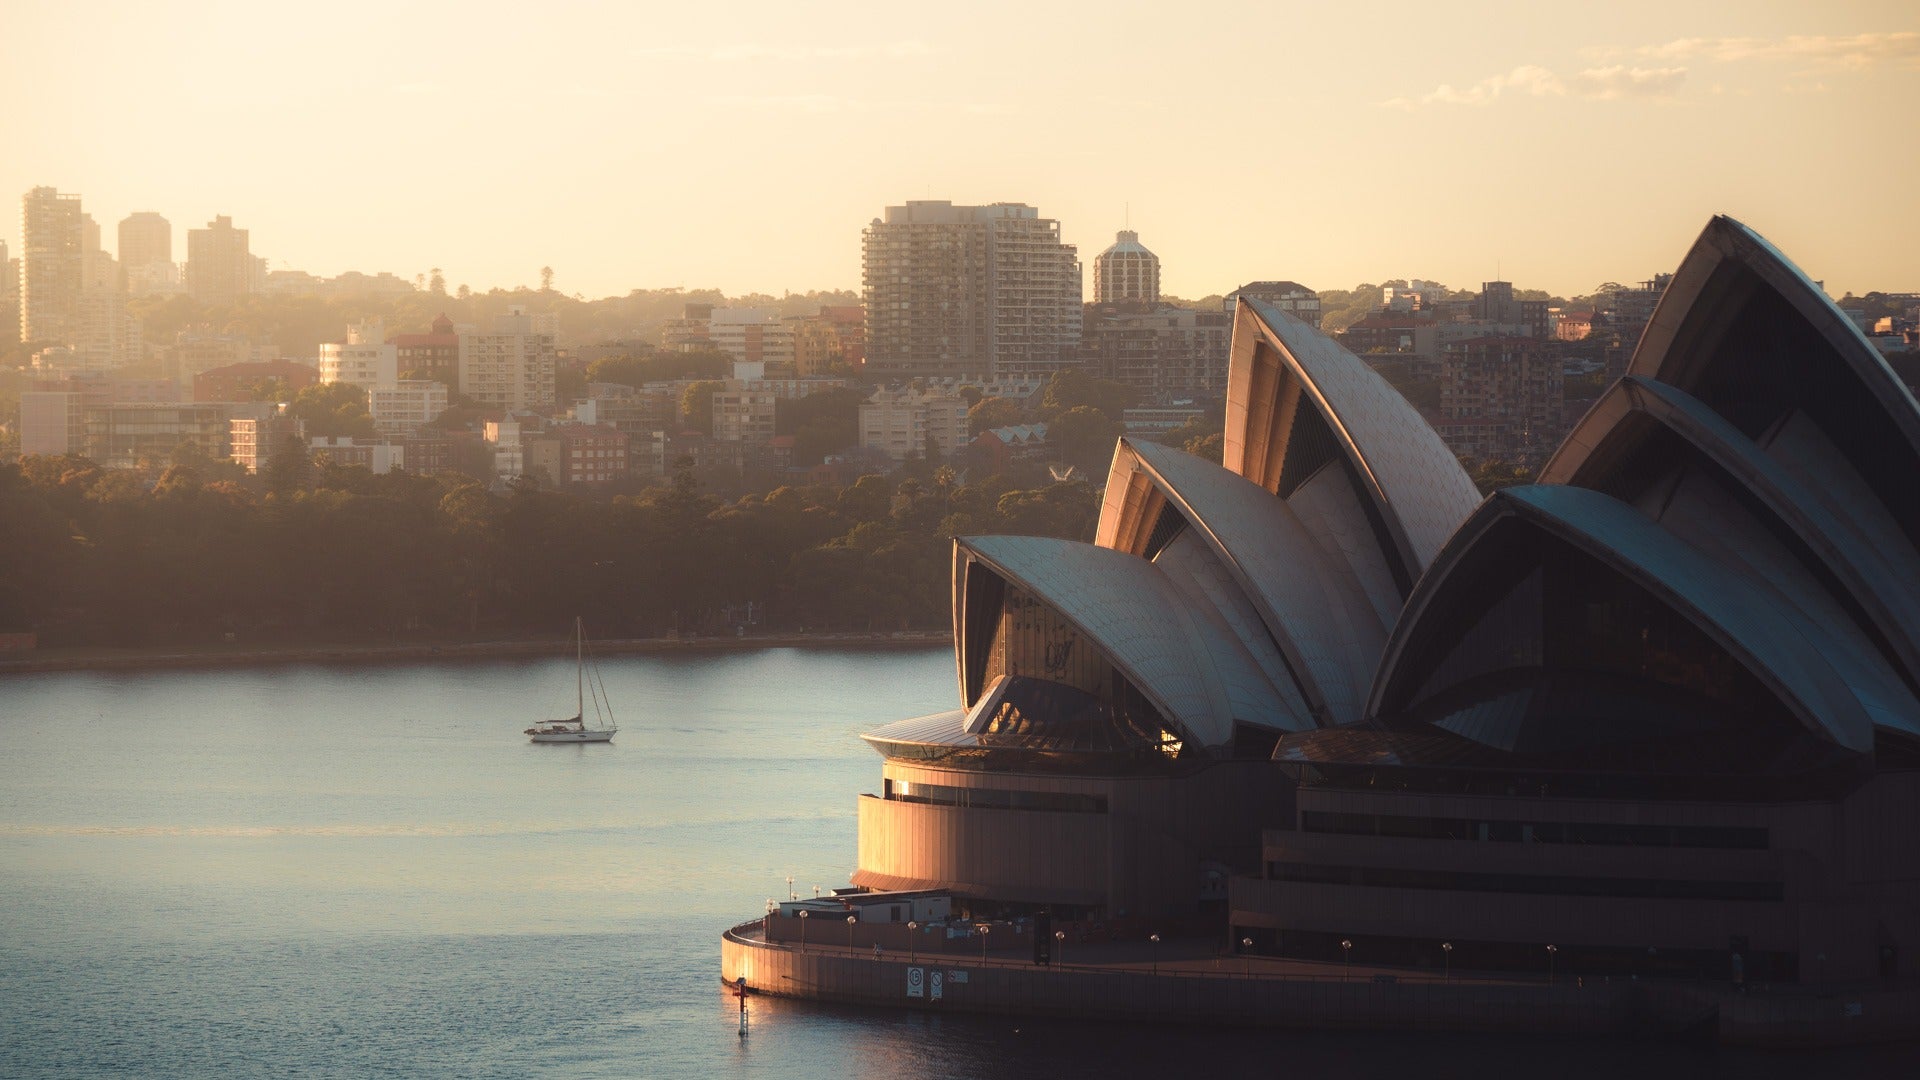 5 best places to photograph the Sydney Opera House - Pat Kay Away